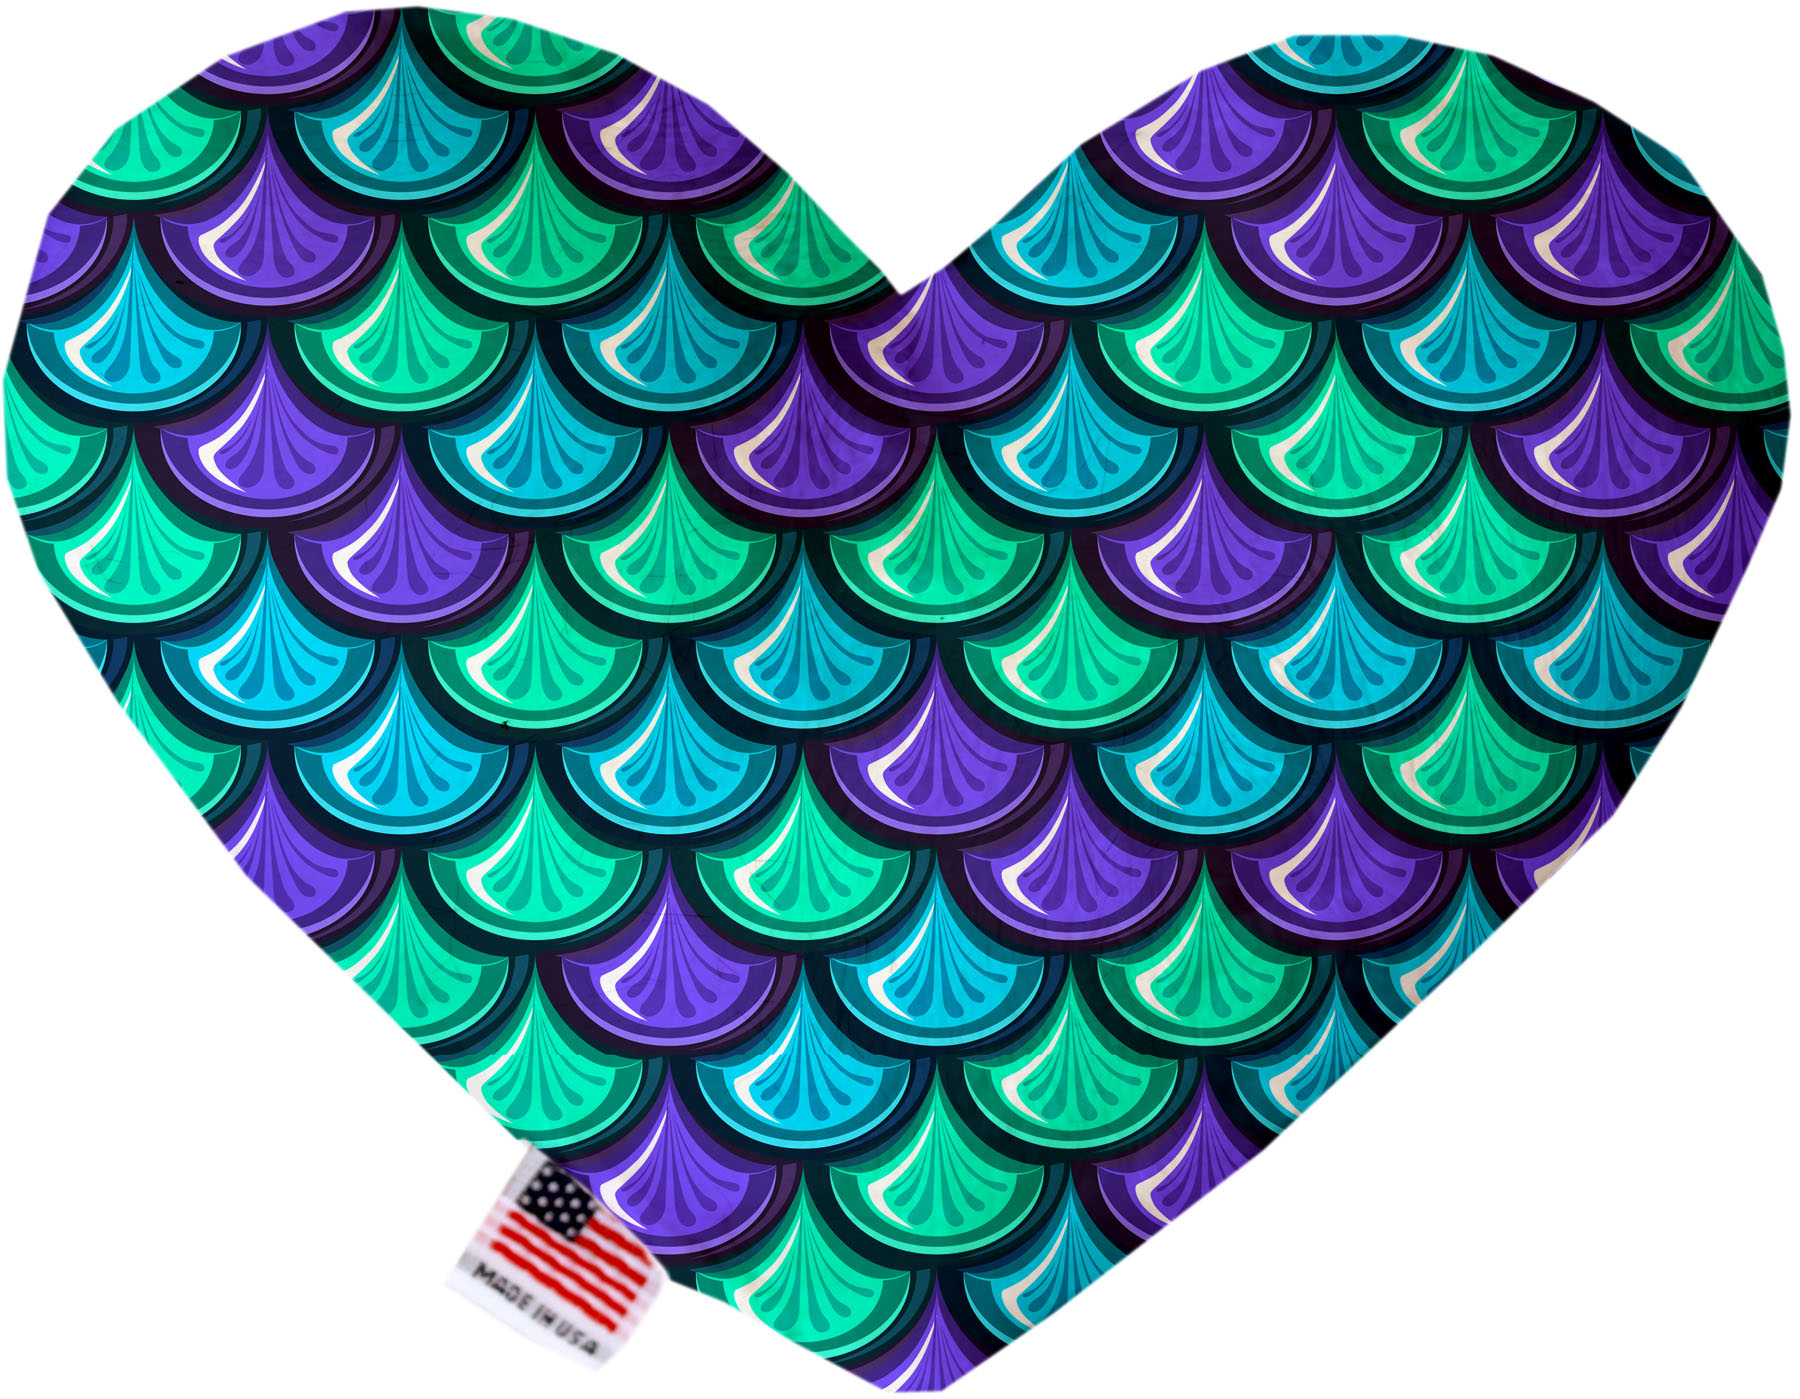 Mermaid Scales 8 inch Heart Dog Toy